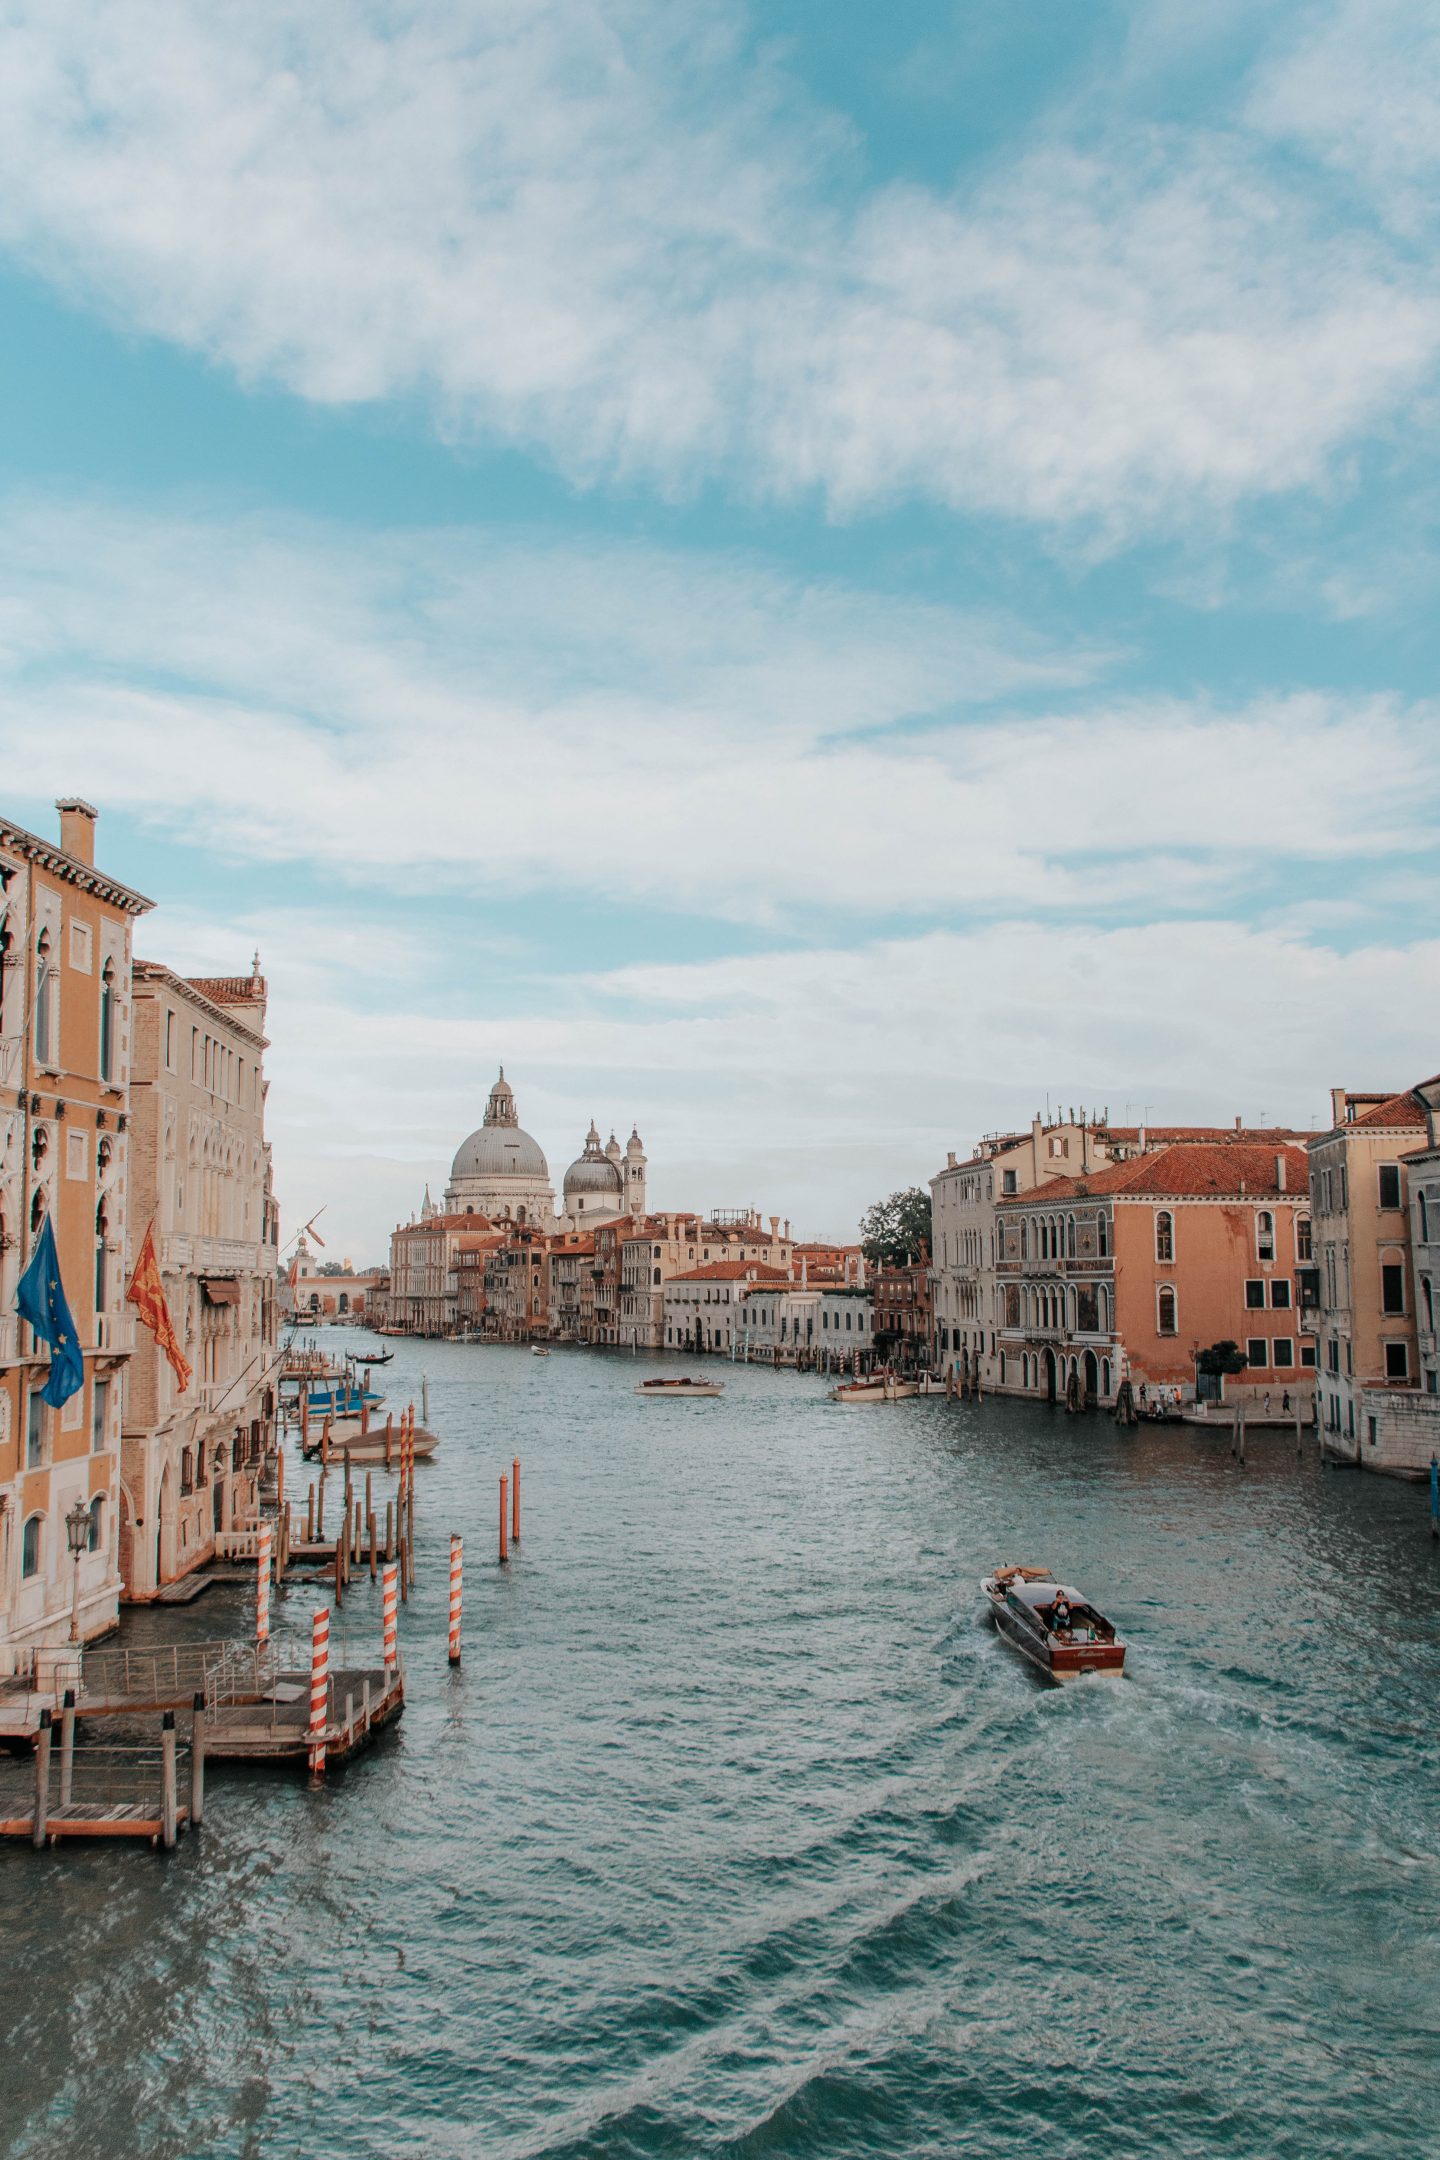 Venice on a Budget: How to Save Money on Accommodation, Food, & More